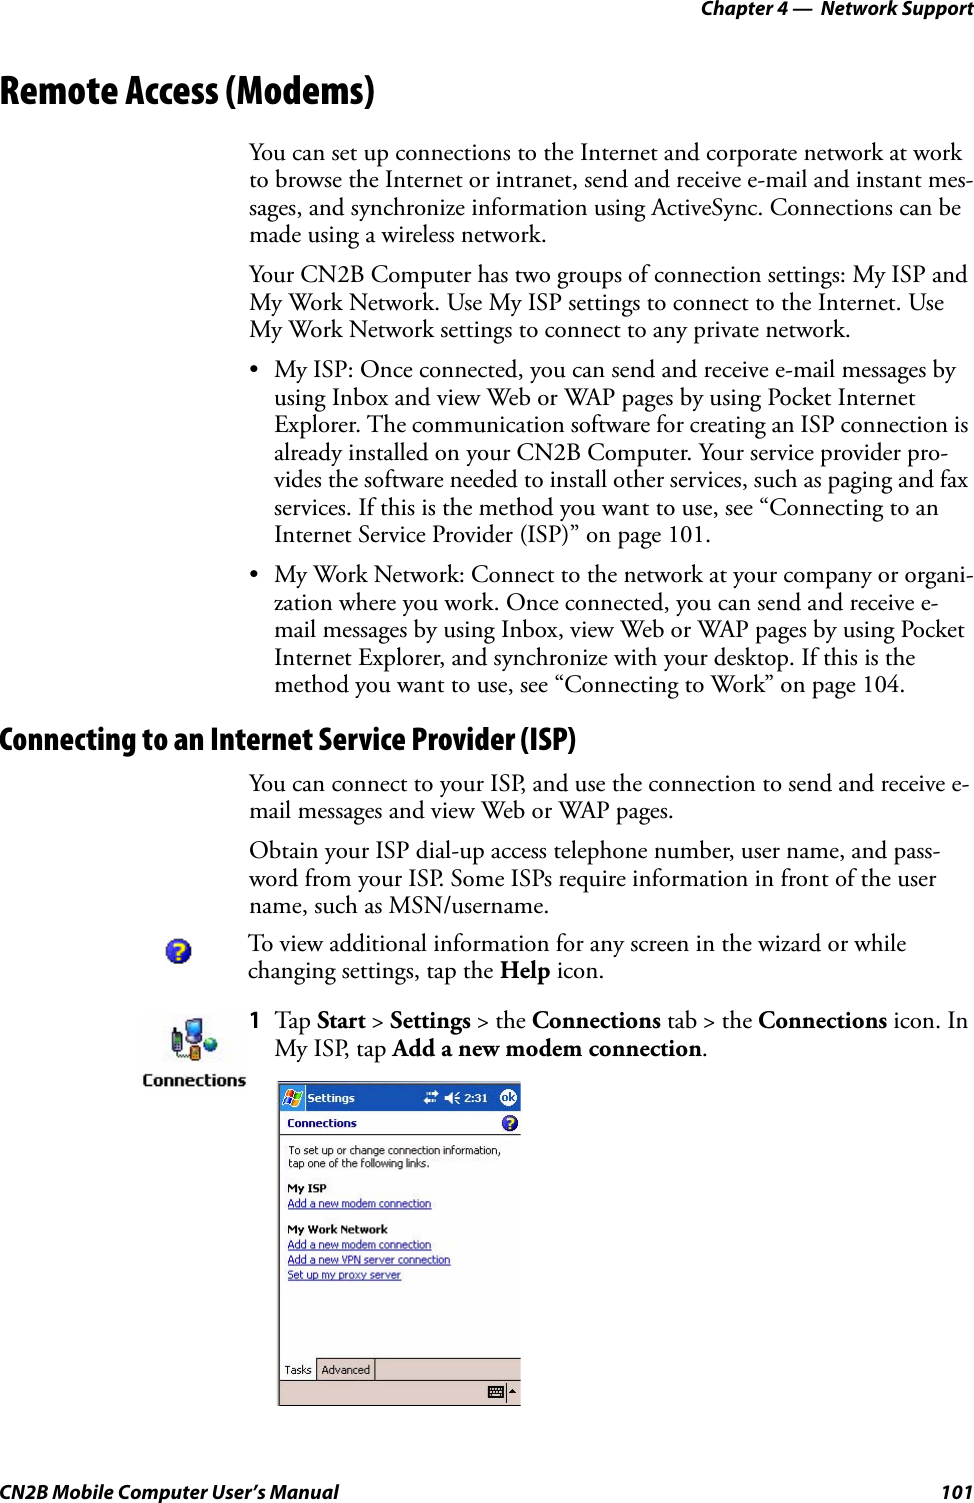 Chapter 4 —  Network SupportCN2B Mobile Computer User’s Manual 101Remote Access (Modems)You can set up connections to the Internet and corporate network at work to browse the Internet or intranet, send and receive e-mail and instant mes-sages, and synchronize information using ActiveSync. Connections can be made using a wireless network.Your CN2B Computer has two groups of connection settings: My ISP and My Work Network. Use My ISP settings to connect to the Internet. Use My Work Network settings to connect to any private network.• My ISP: Once connected, you can send and receive e-mail messages by using Inbox and view Web or WAP pages by using Pocket Internet Explorer. The communication software for creating an ISP connection is already installed on your CN2B Computer. Your service provider pro-vides the software needed to install other services, such as paging and fax services. If this is the method you want to use, see “Connecting to an Internet Service Provider (ISP)” on page 101.• My Work Network: Connect to the network at your company or organi-zation where you work. Once connected, you can send and receive e-mail messages by using Inbox, view Web or WAP pages by using Pocket Internet Explorer, and synchronize with your desktop. If this is the method you want to use, see “Connecting to Work” on page 104.Connecting to an Internet Service Provider (ISP)You can connect to your ISP, and use the connection to send and receive e-mail messages and view Web or WAP pages.Obtain your ISP dial-up access telephone number, user name, and pass-word from your ISP. Some ISPs require information in front of the user name, such as MSN/username.To view additional information for any screen in the wizard or while changing settings, tap the Help icon.1Tap Start &gt; Settings &gt; the Connections tab &gt; the Connections icon. In My ISP, tap Add a new modem connection.